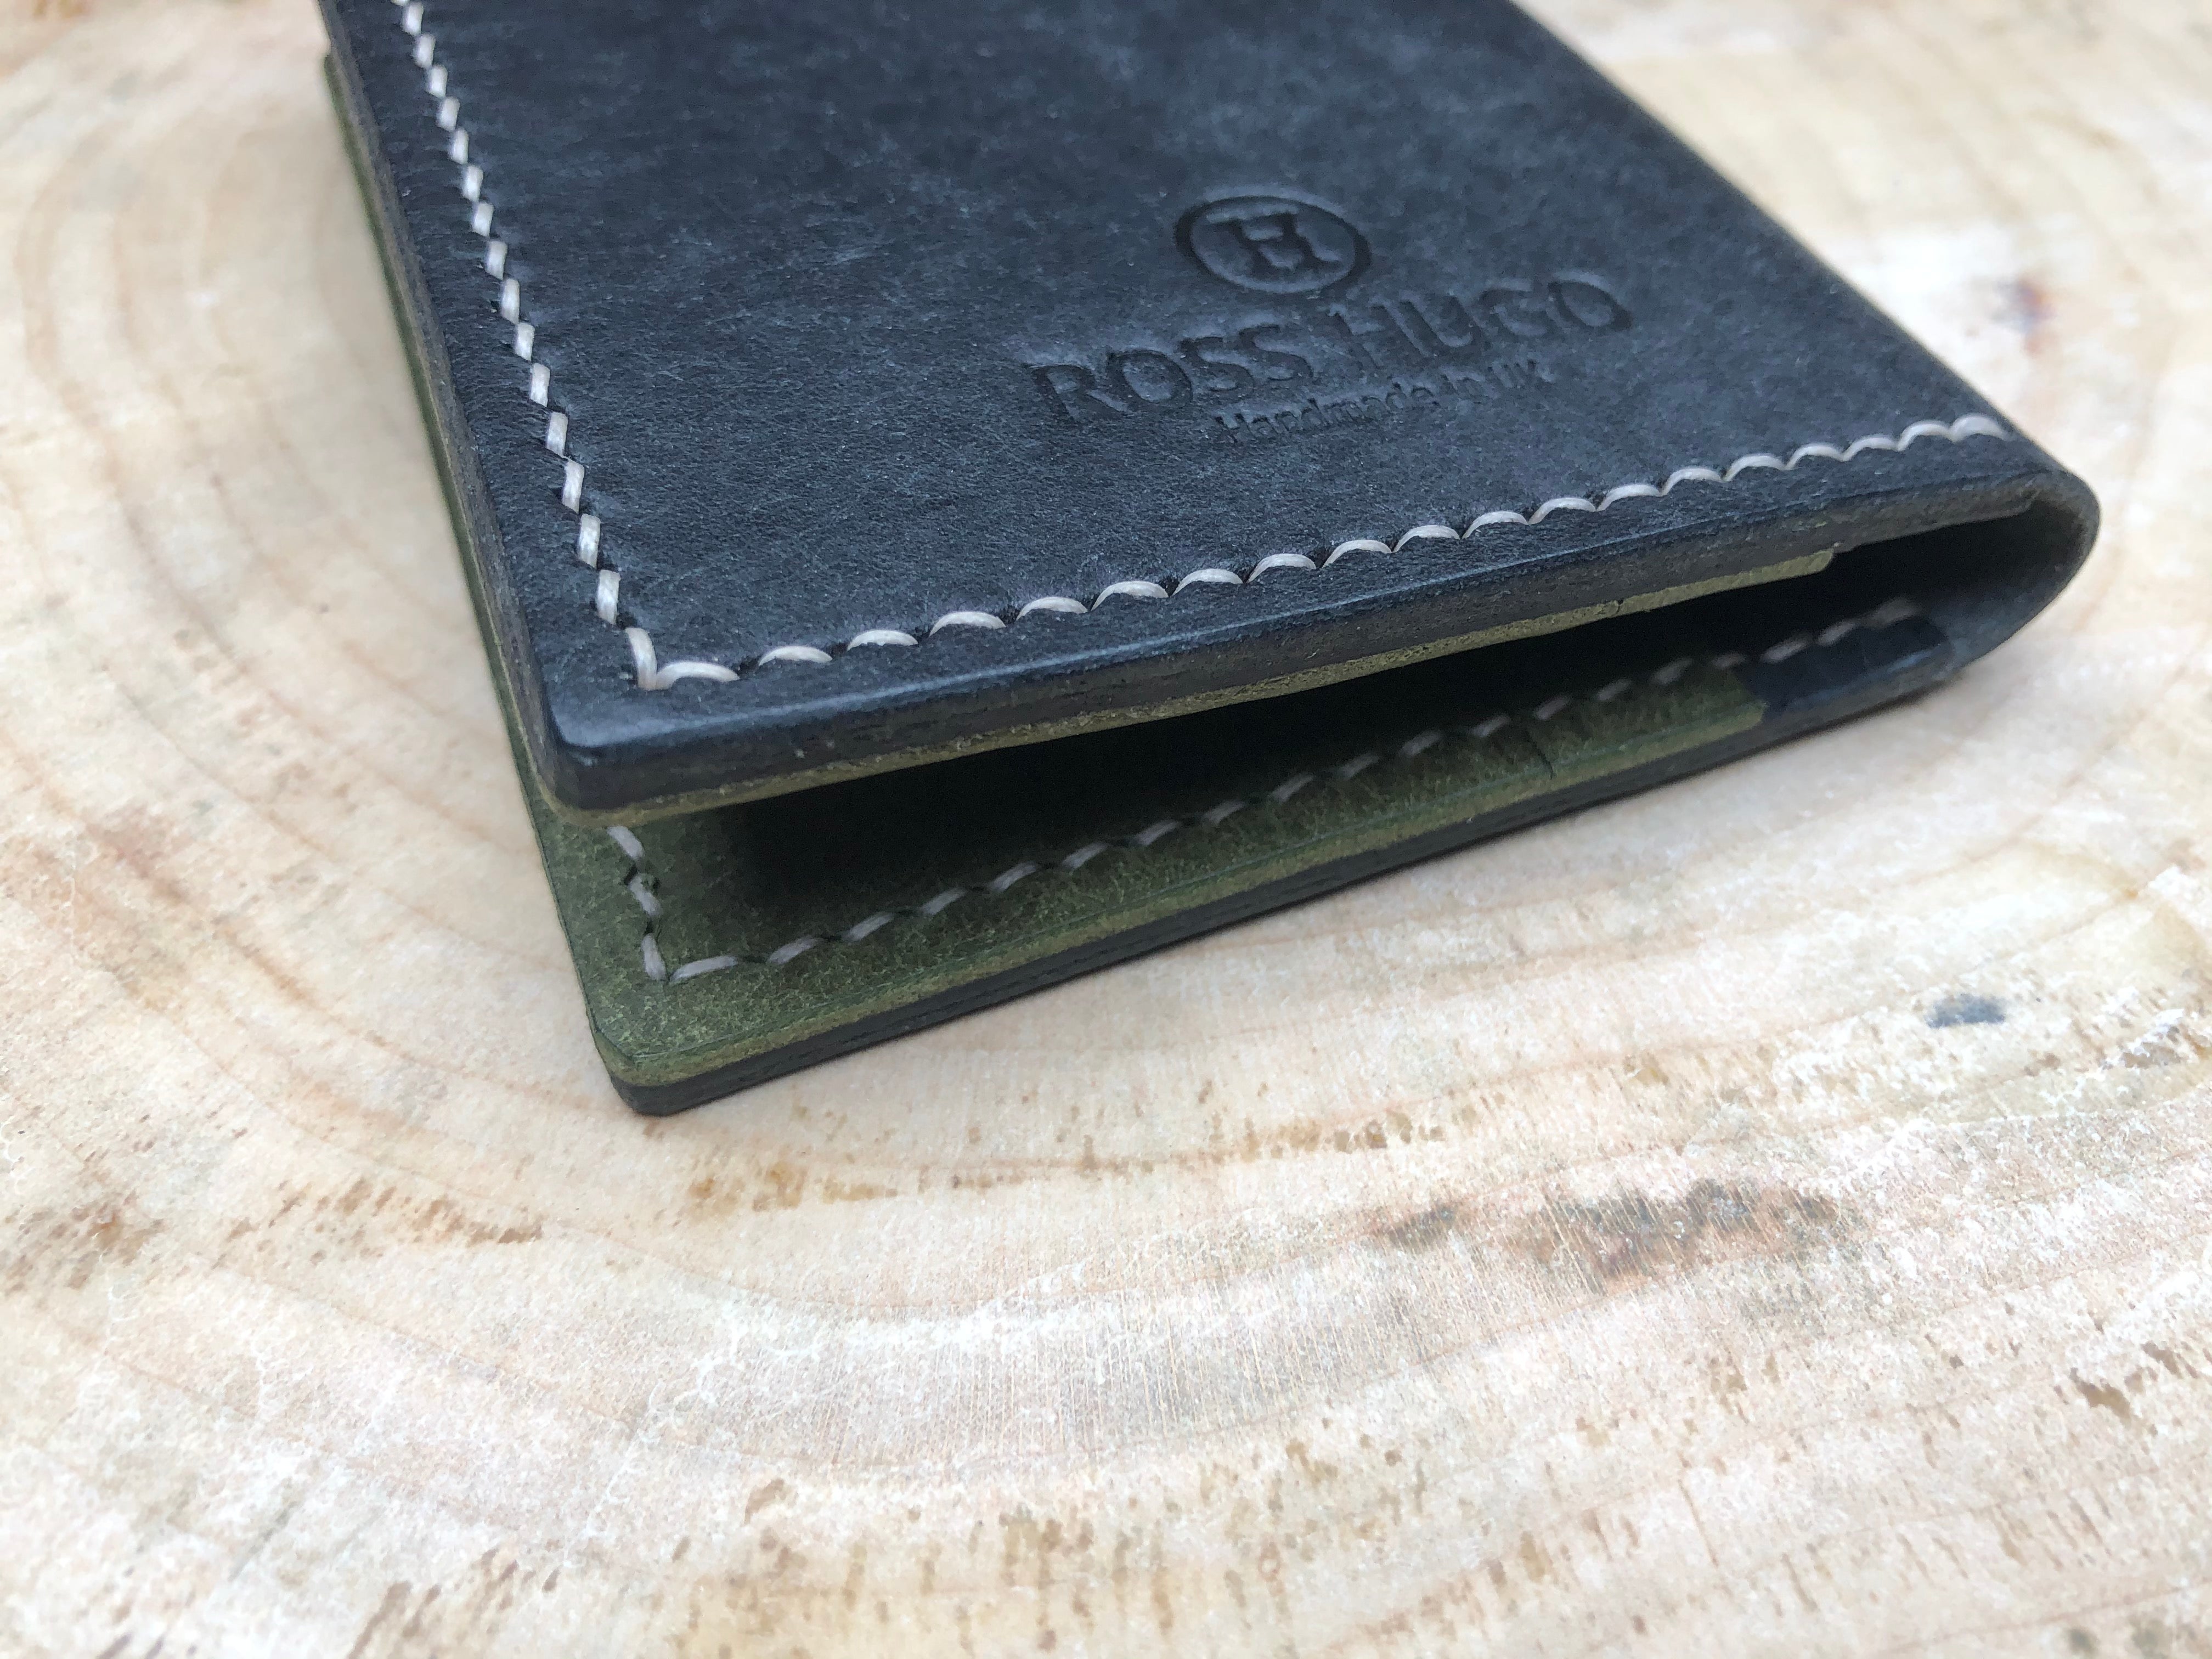 Beautiful Handmade Leather Wallet - Made in UK